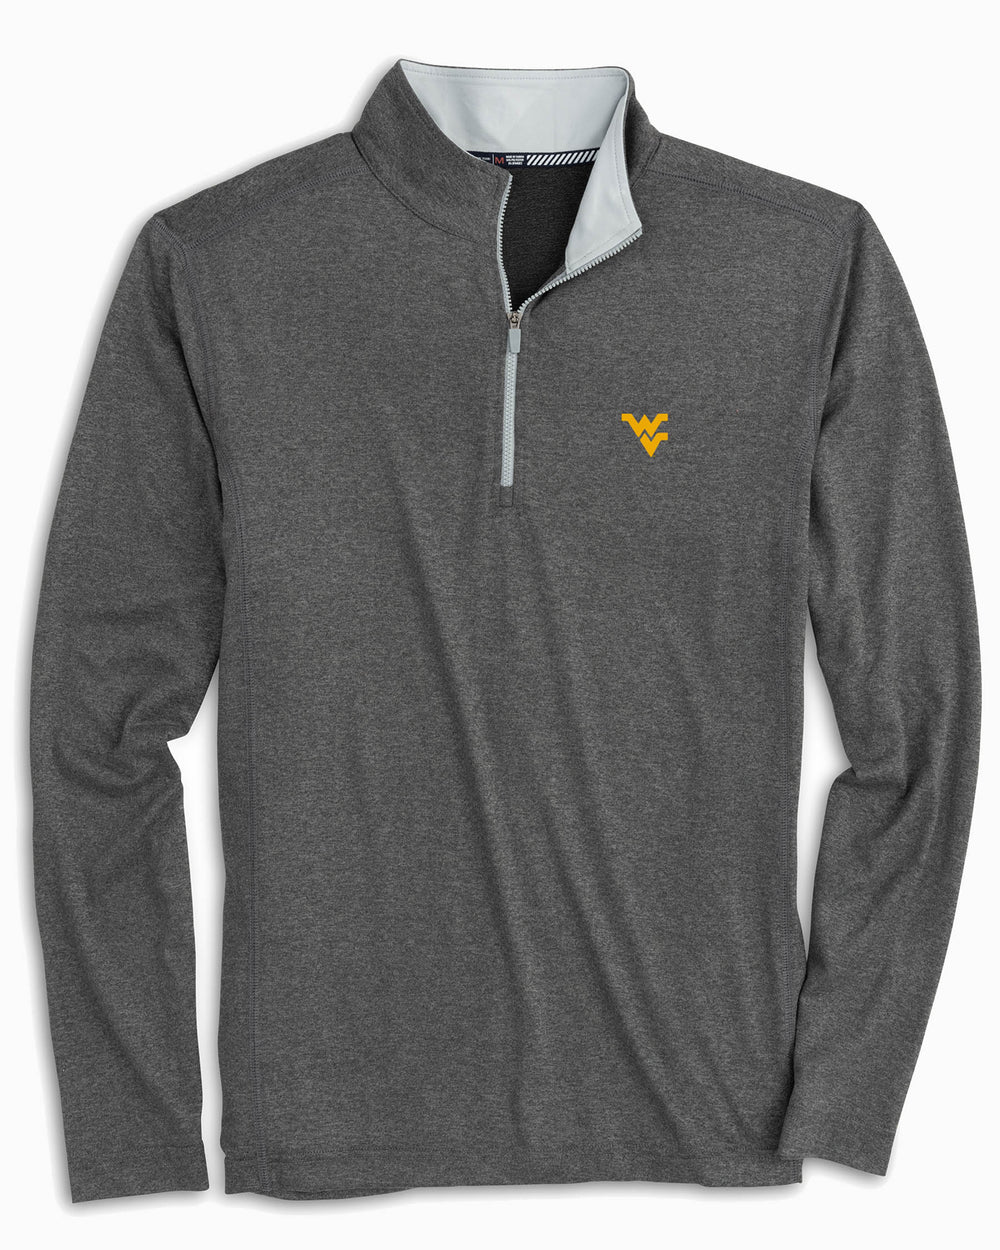 The front view of the Men's West Virginia University Flanker Quarter Zip Pullover by Southern Tide - Heather Polarized Grey